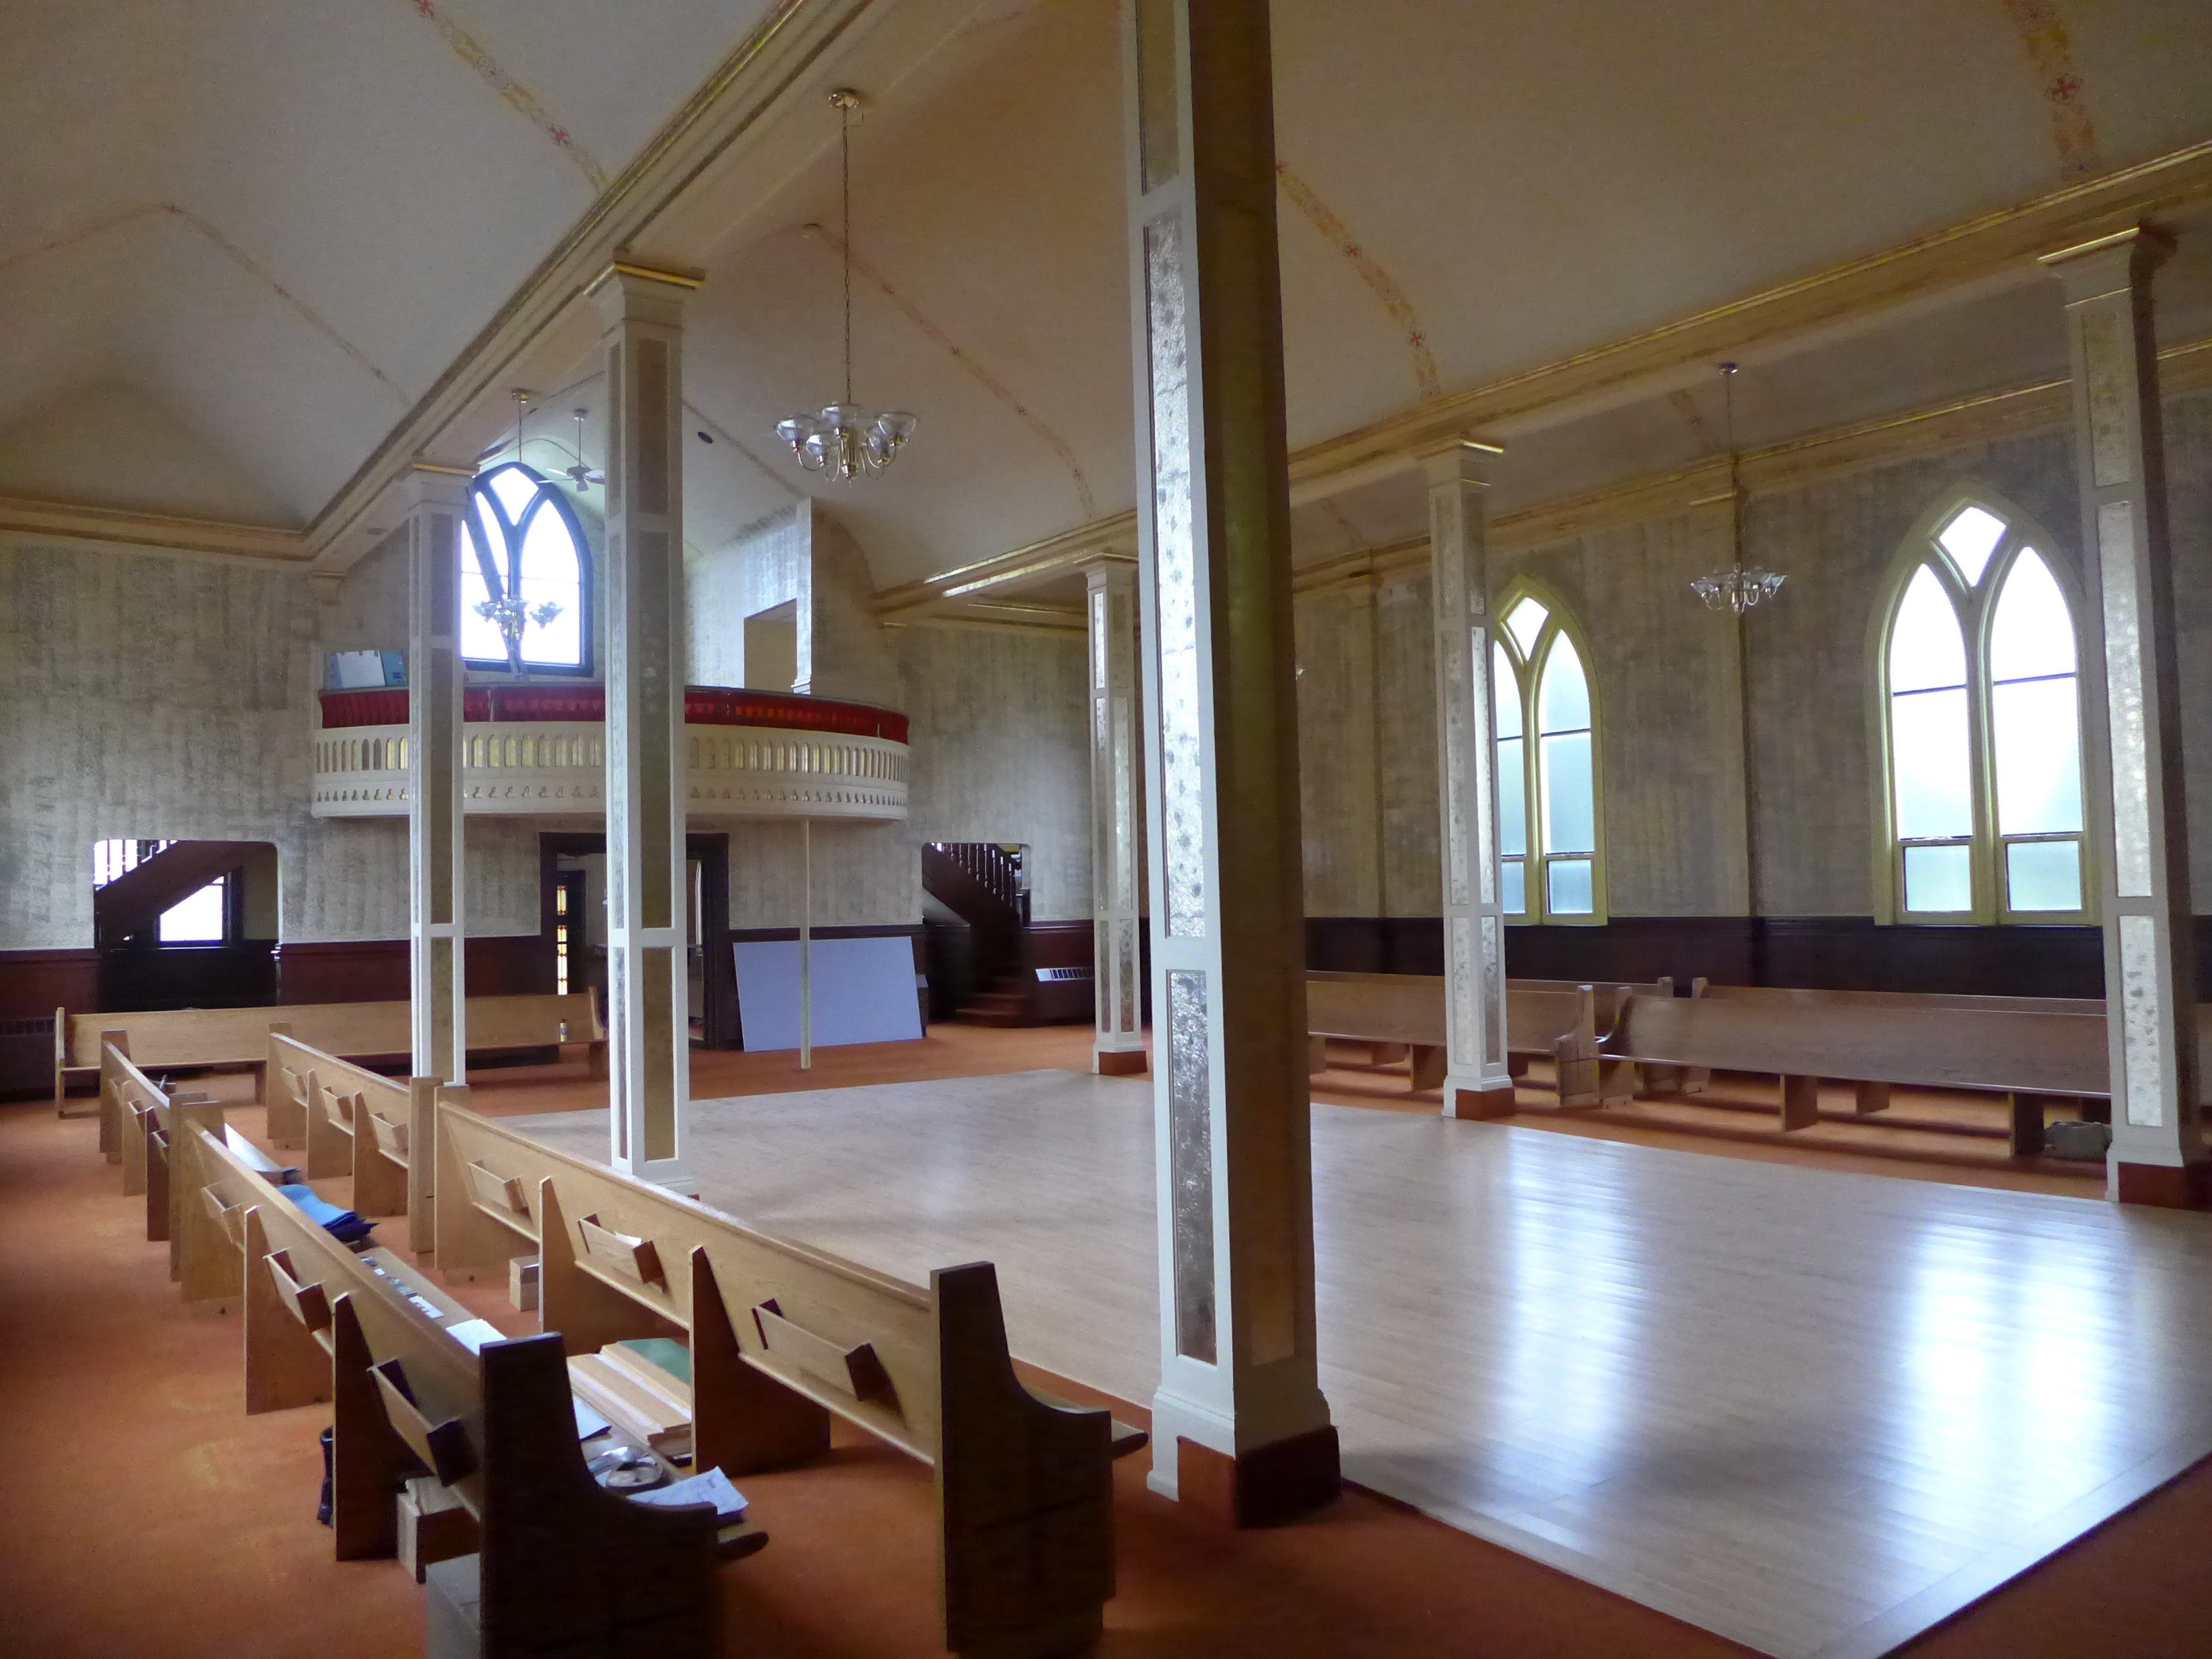 A church hall that is empty